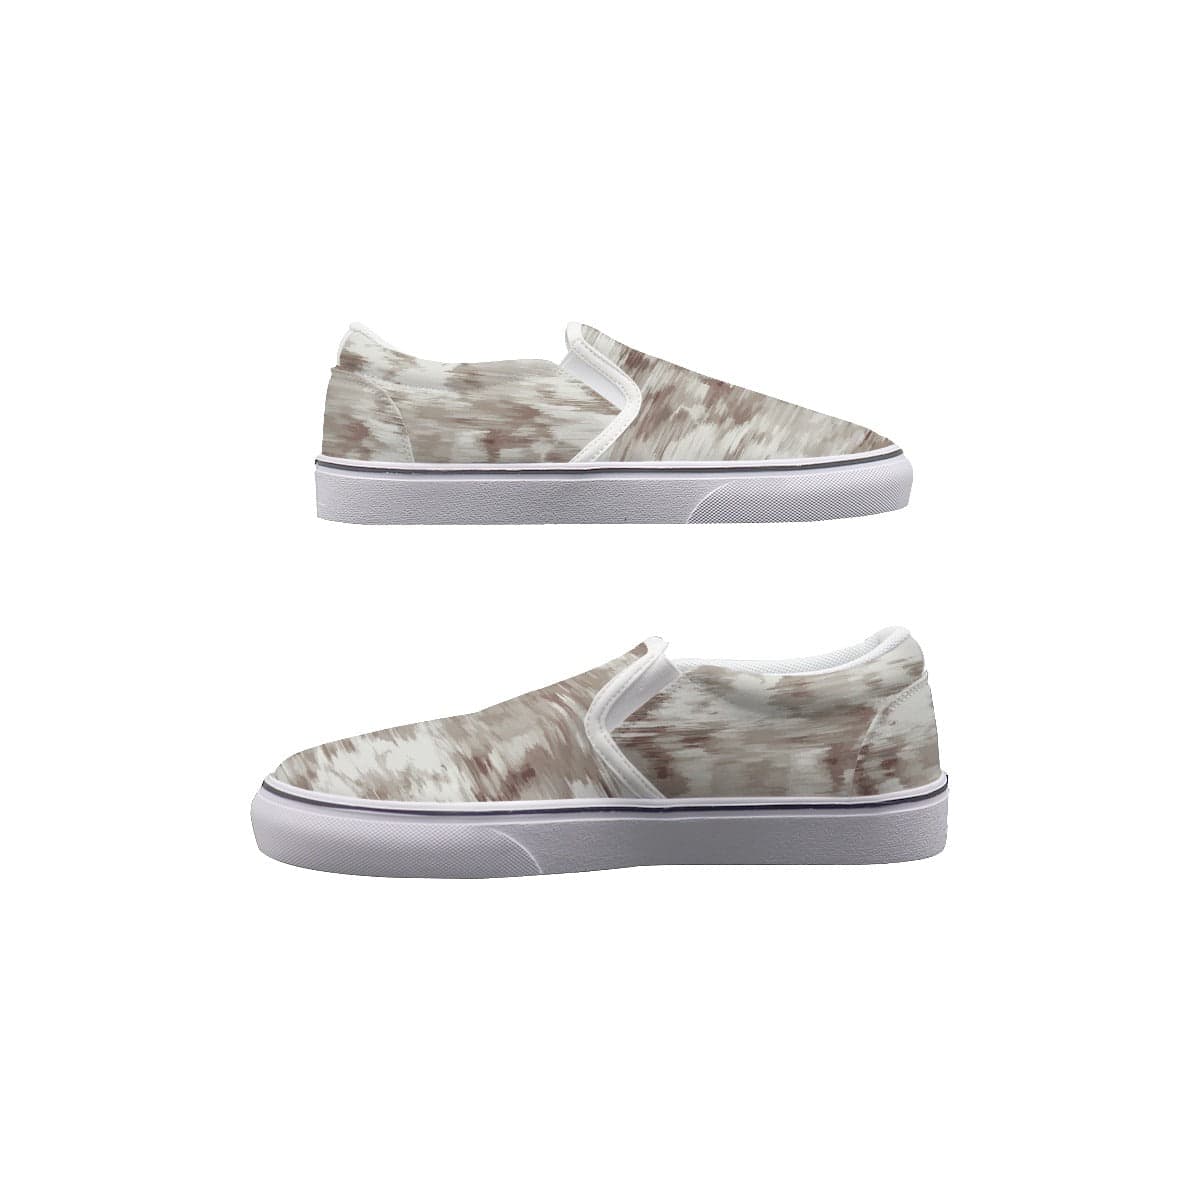 Yoycol Soft Sand Hues - Women's Slip On Sneakers